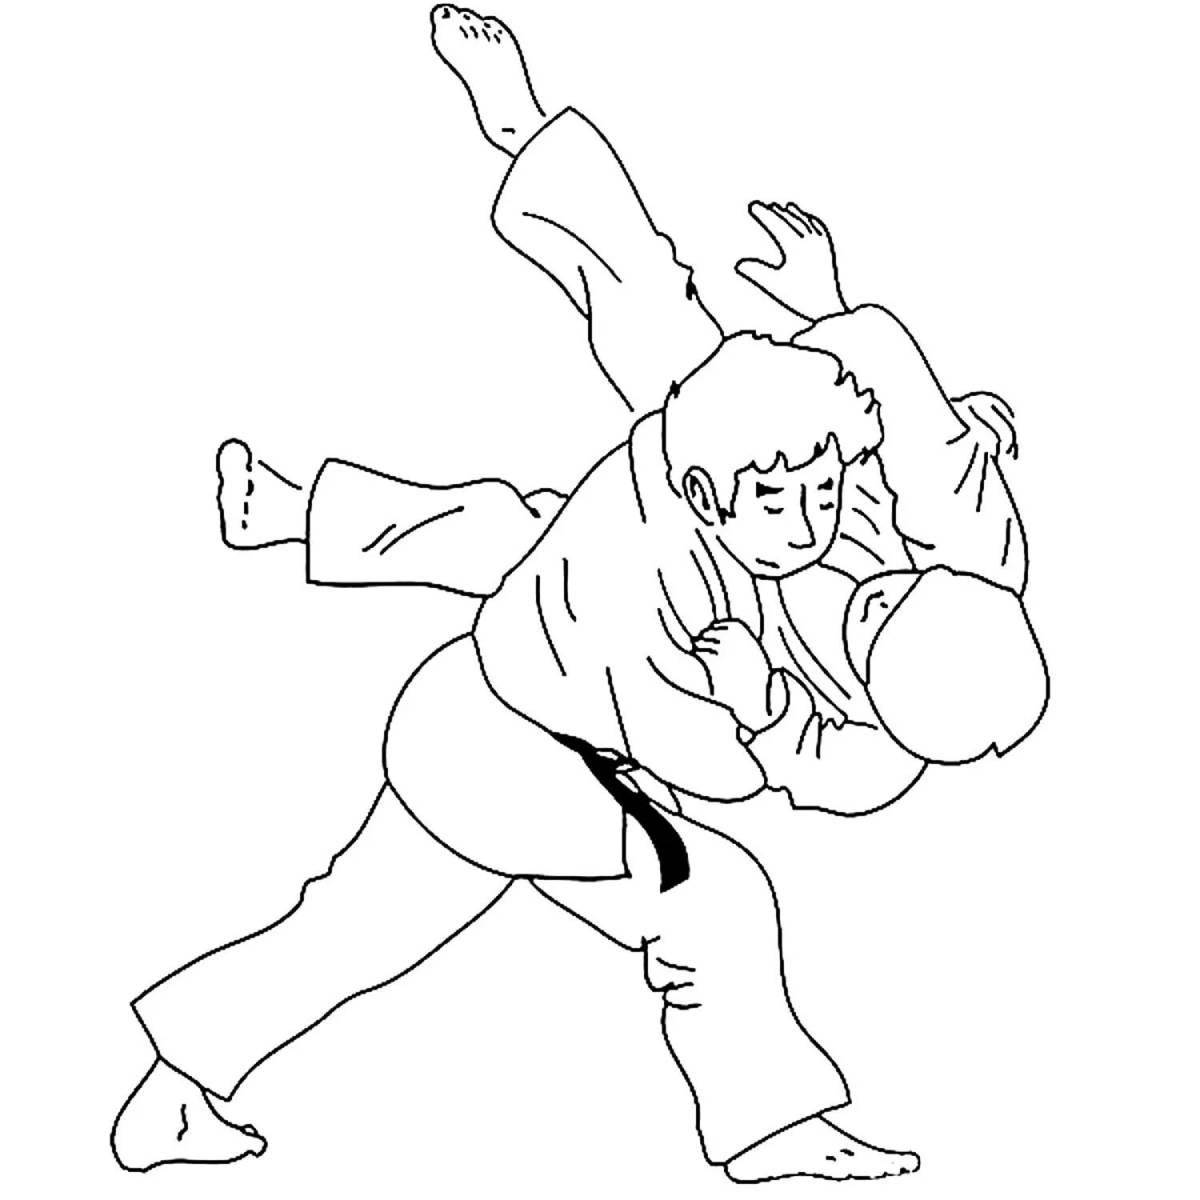 Bright wrestler coloring pages